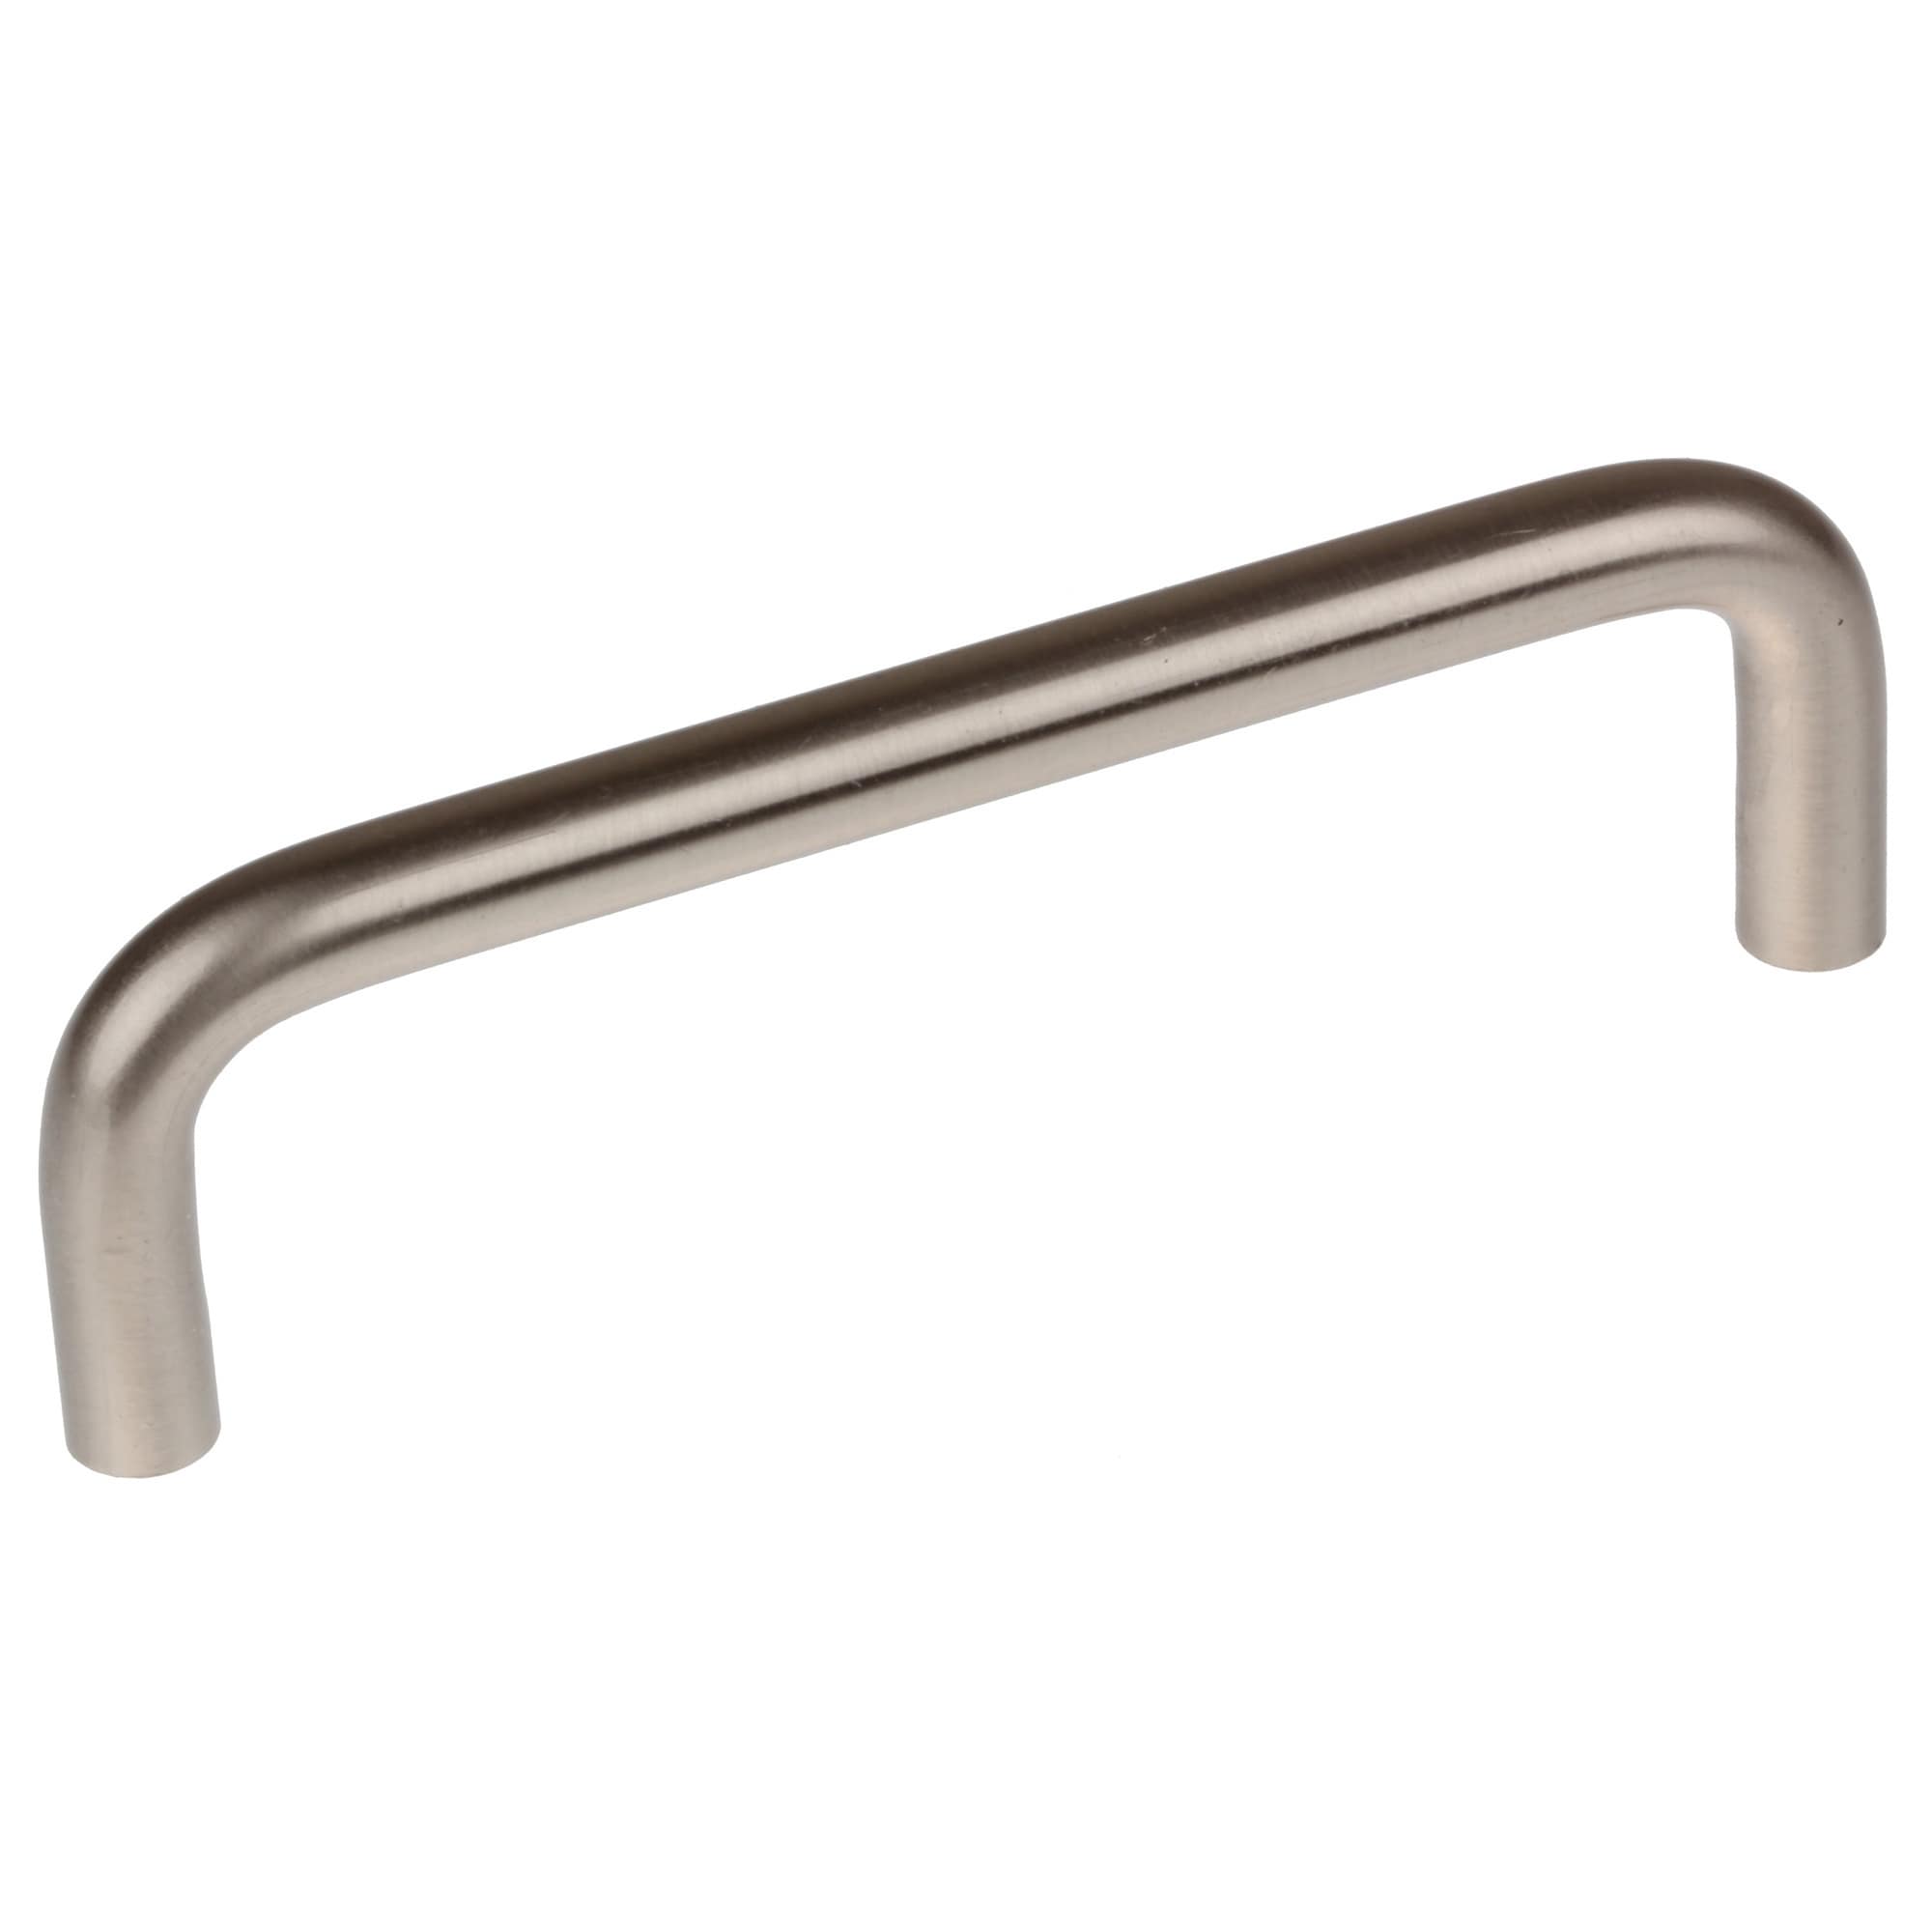 Shop Gliderite 3 Inch Stainless Steel Cabinet Finished Wire Pulls